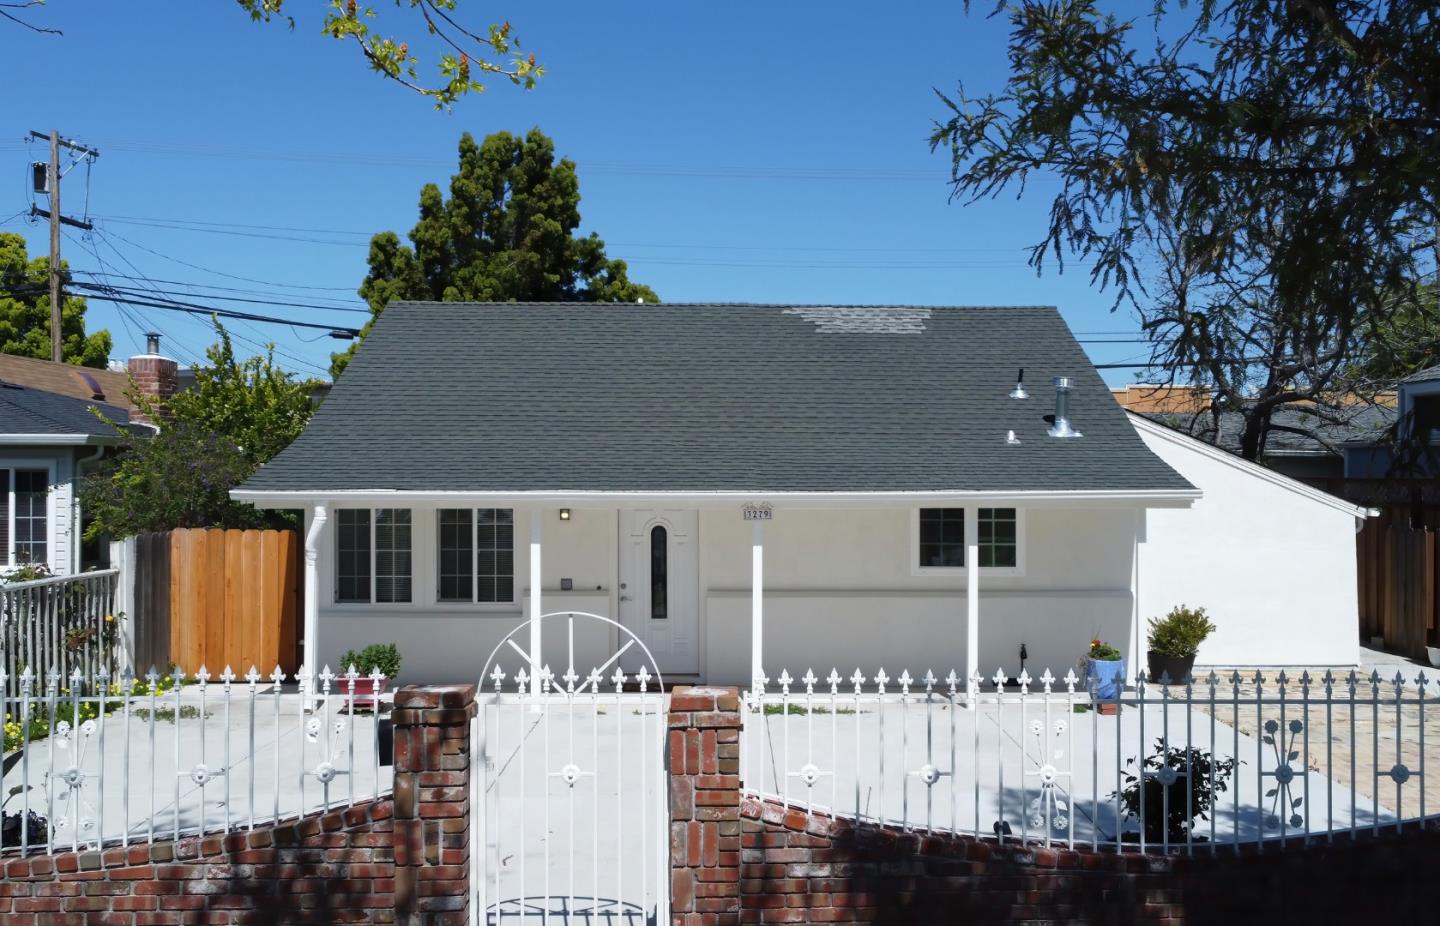 Photo of 3279 Hoover St in Redwood City, CA